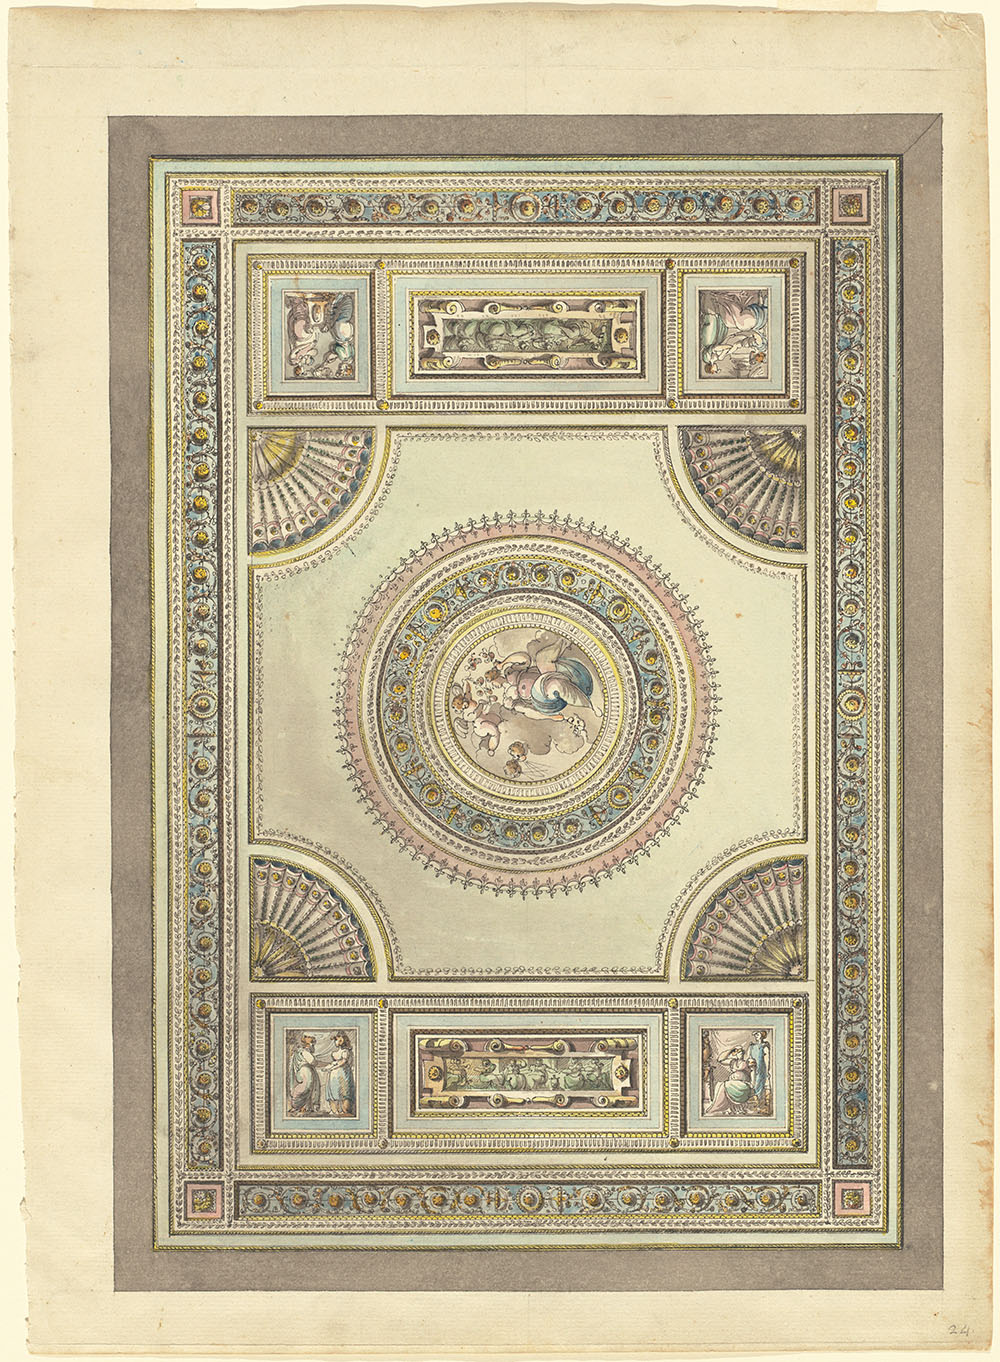 1790-1815_Giacomo Quarenghi_An Ornate Ceiling with an Allegory of Spring_5657-007